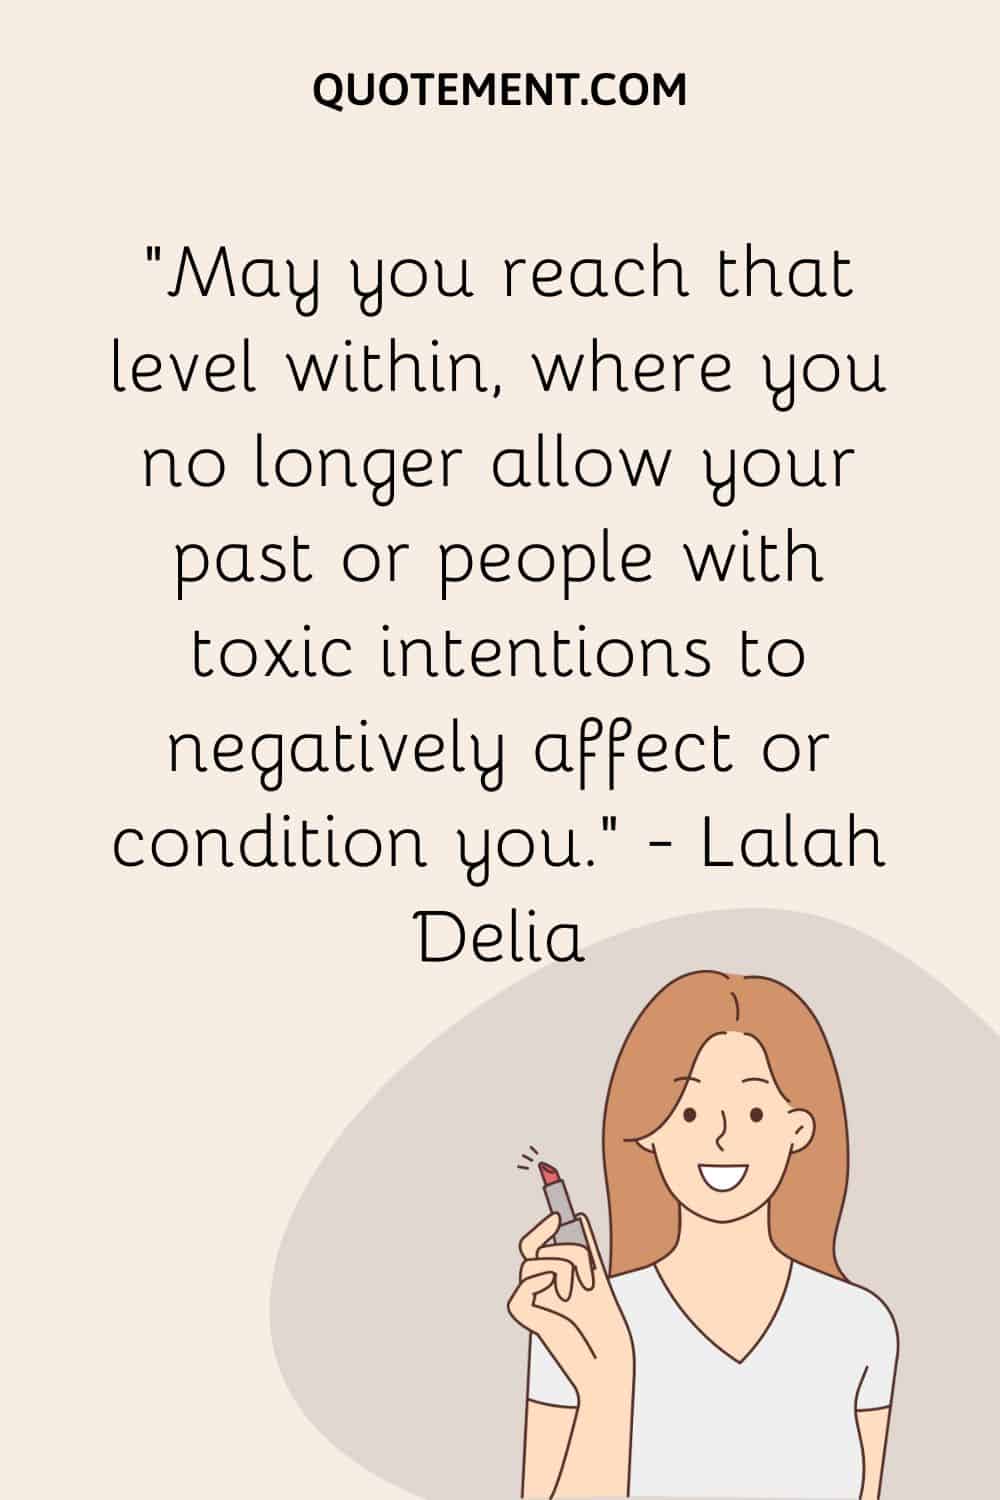 May you reach that level within, where you no longer allow your past or people with toxic intentions to negatively affect or condition you